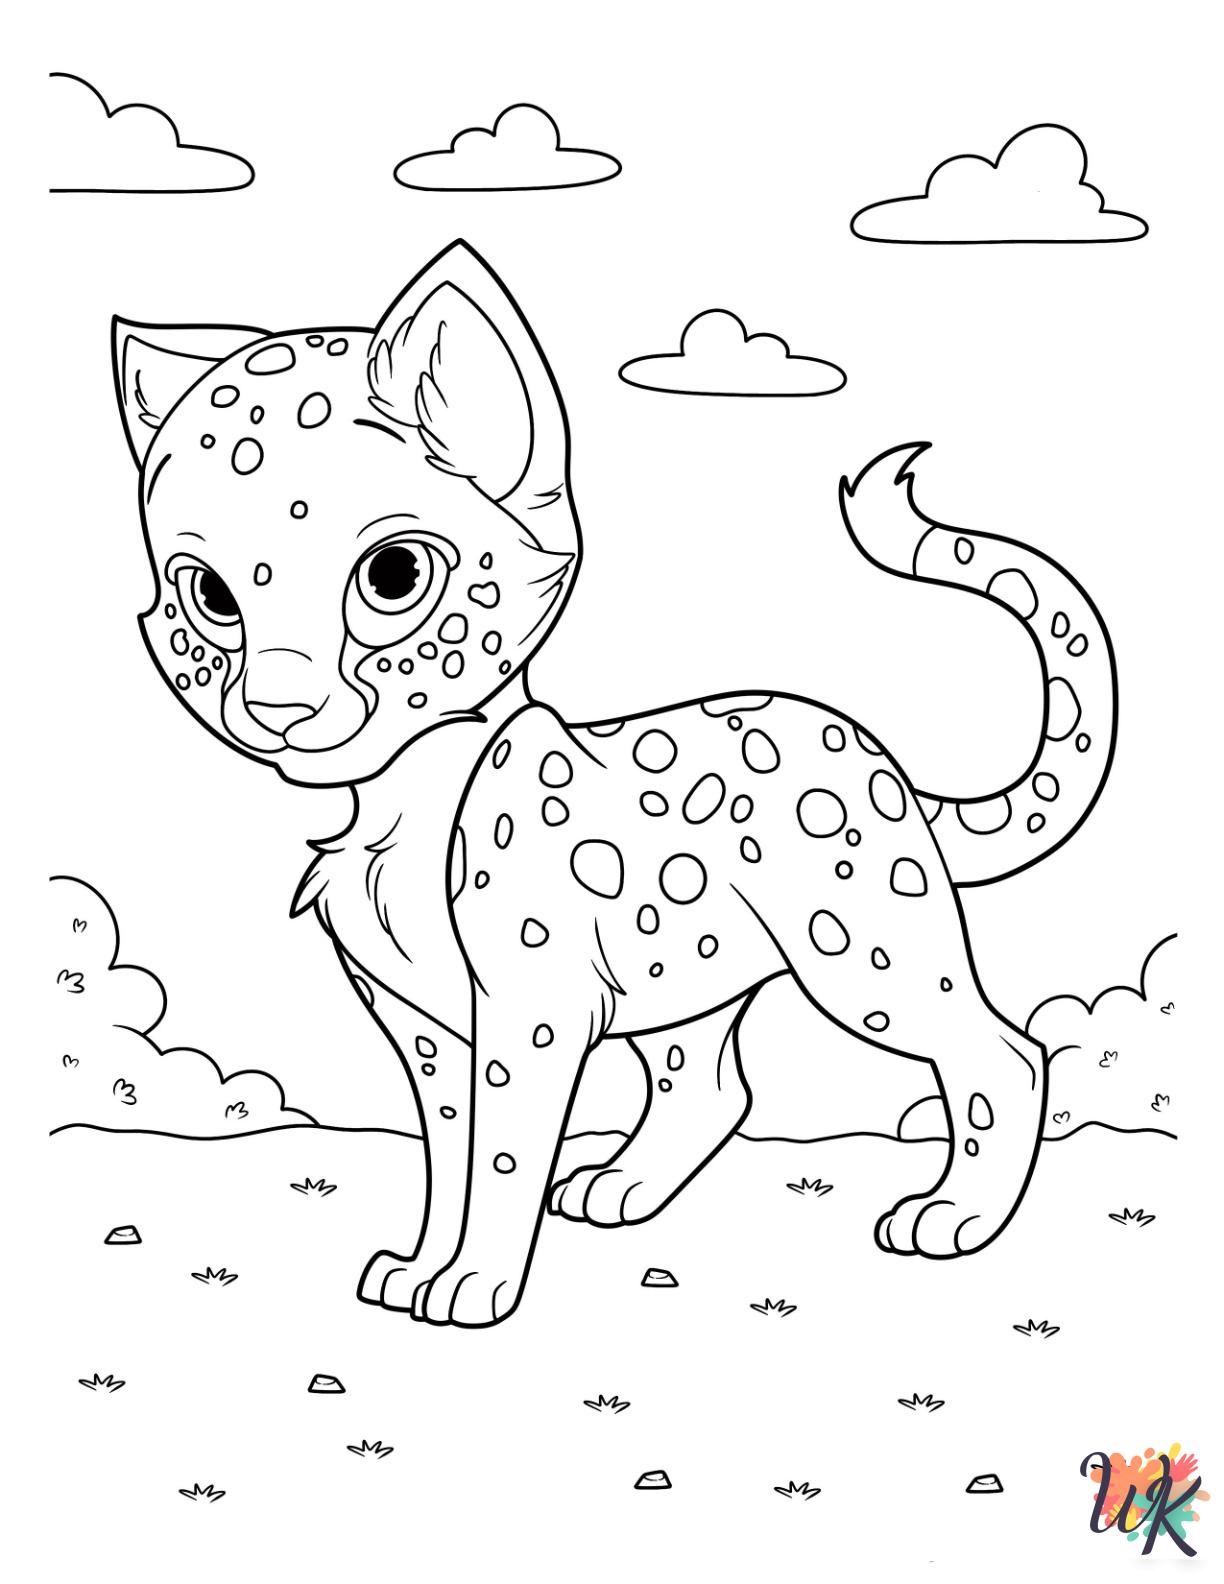 Cheetah decorations coloring pages